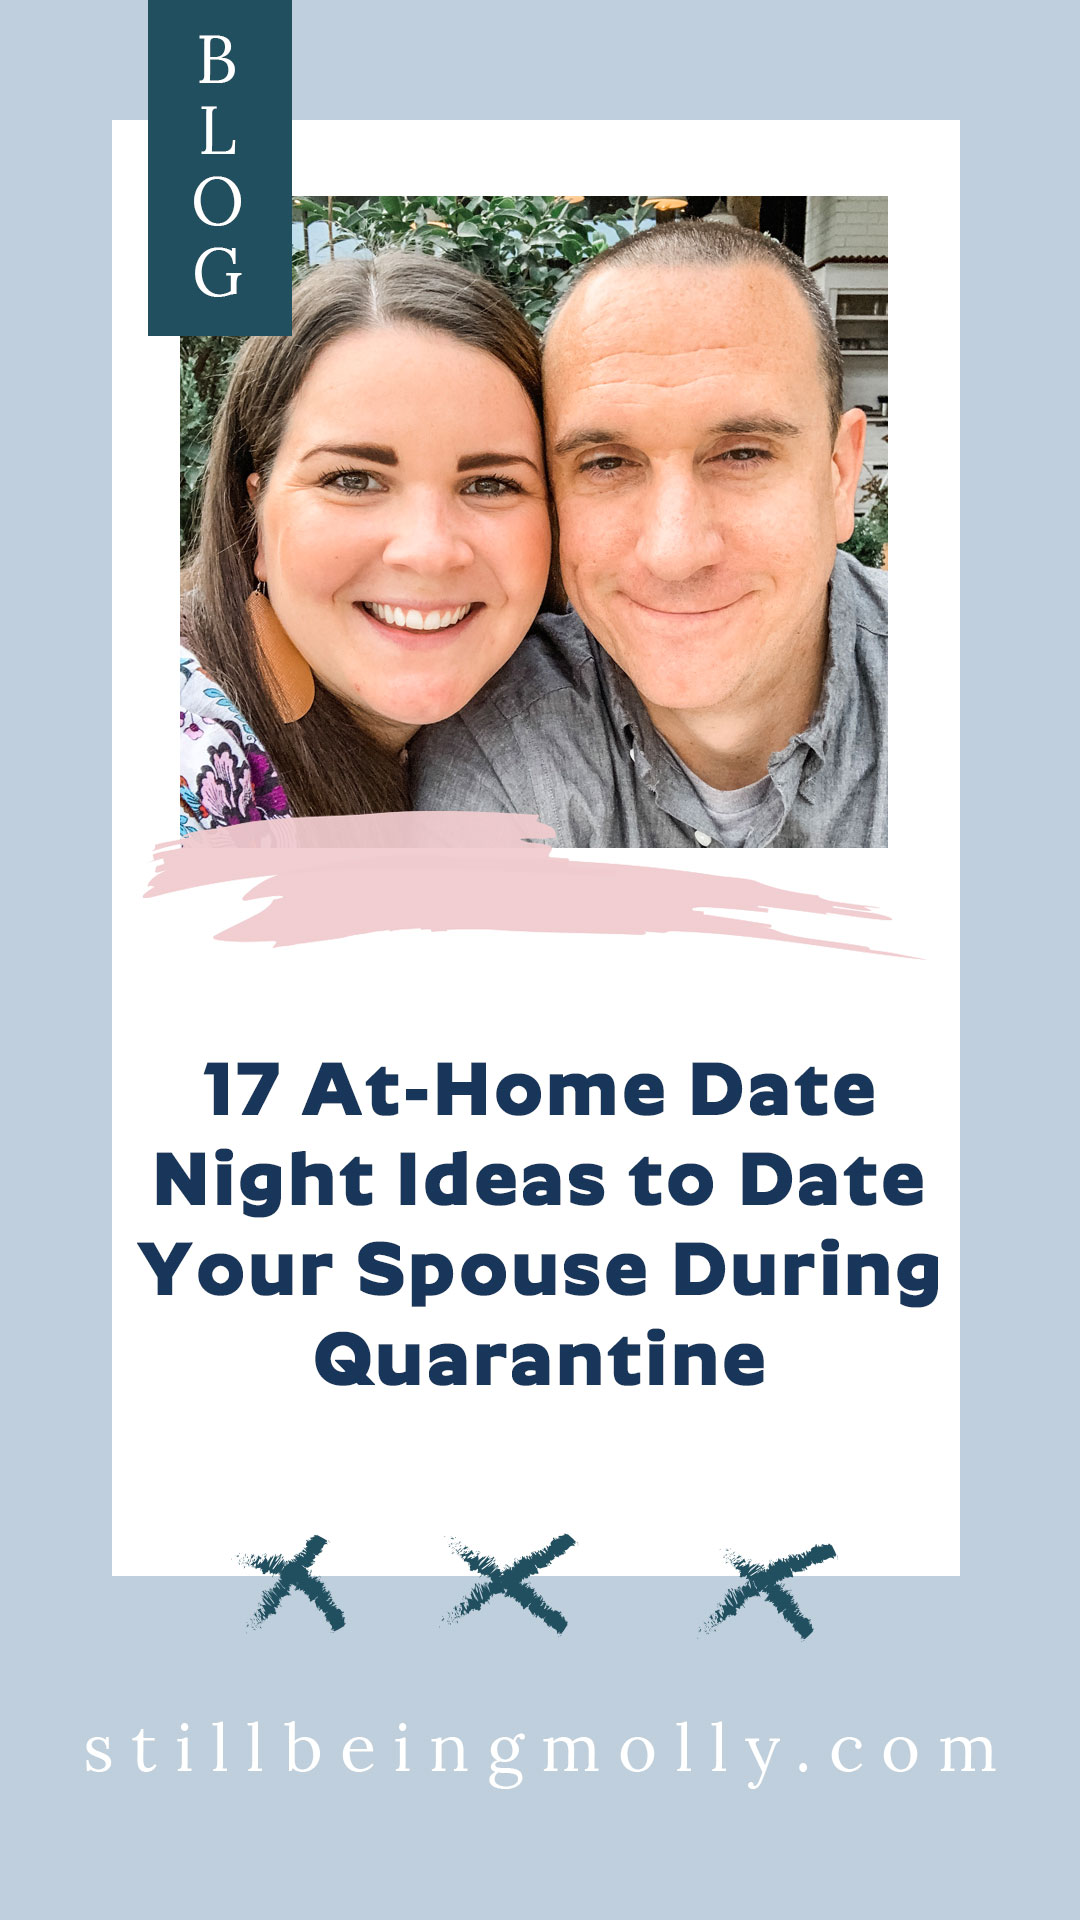 17 At-Home Date Night Ideas to Date Your Spouse During Quarantine